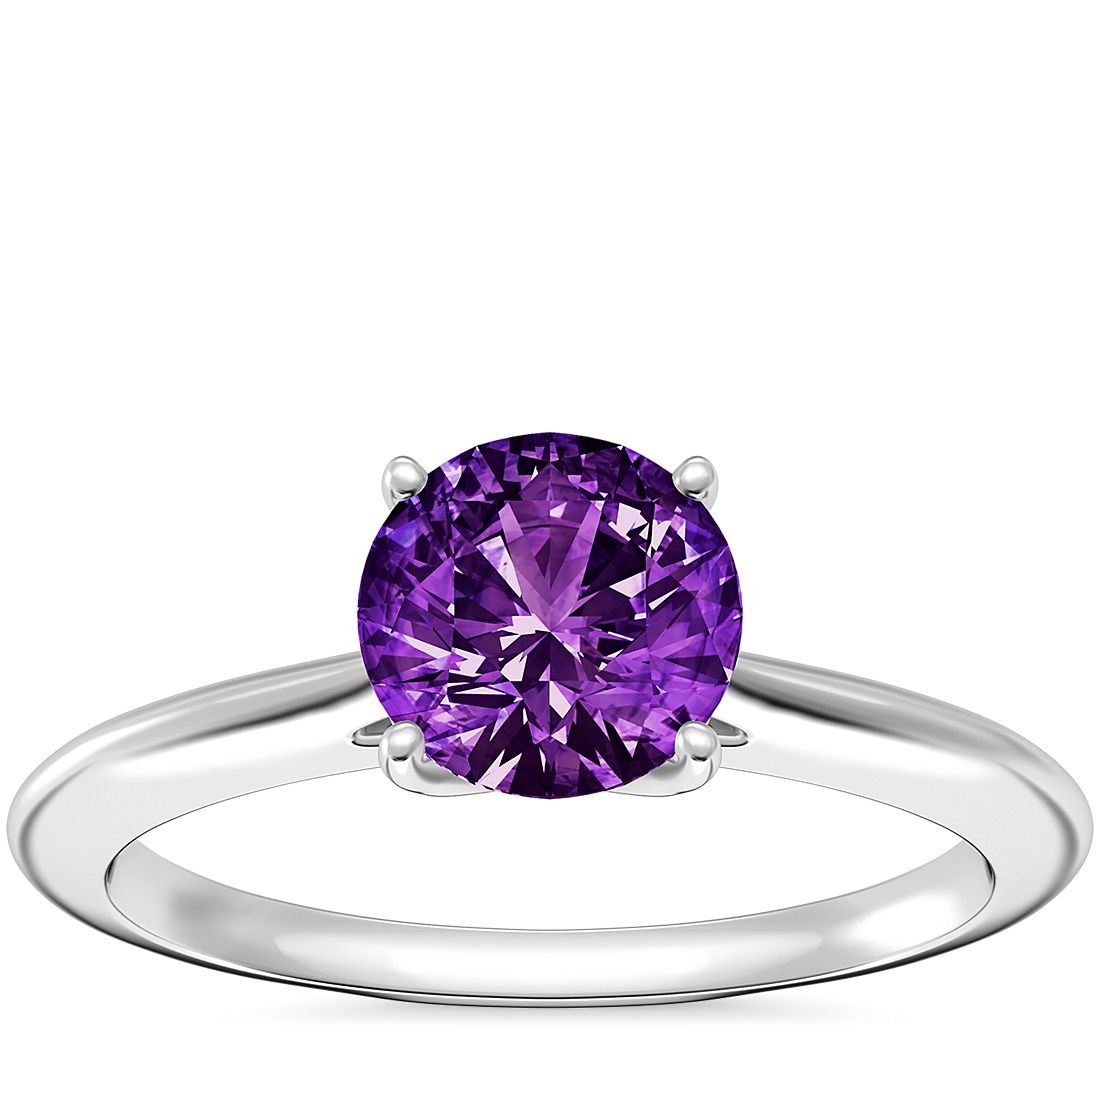 Knife Edge Solitaire Plus Diamond Engagement Ring with Round Amethyst in 14k White Gold (6.5mm)